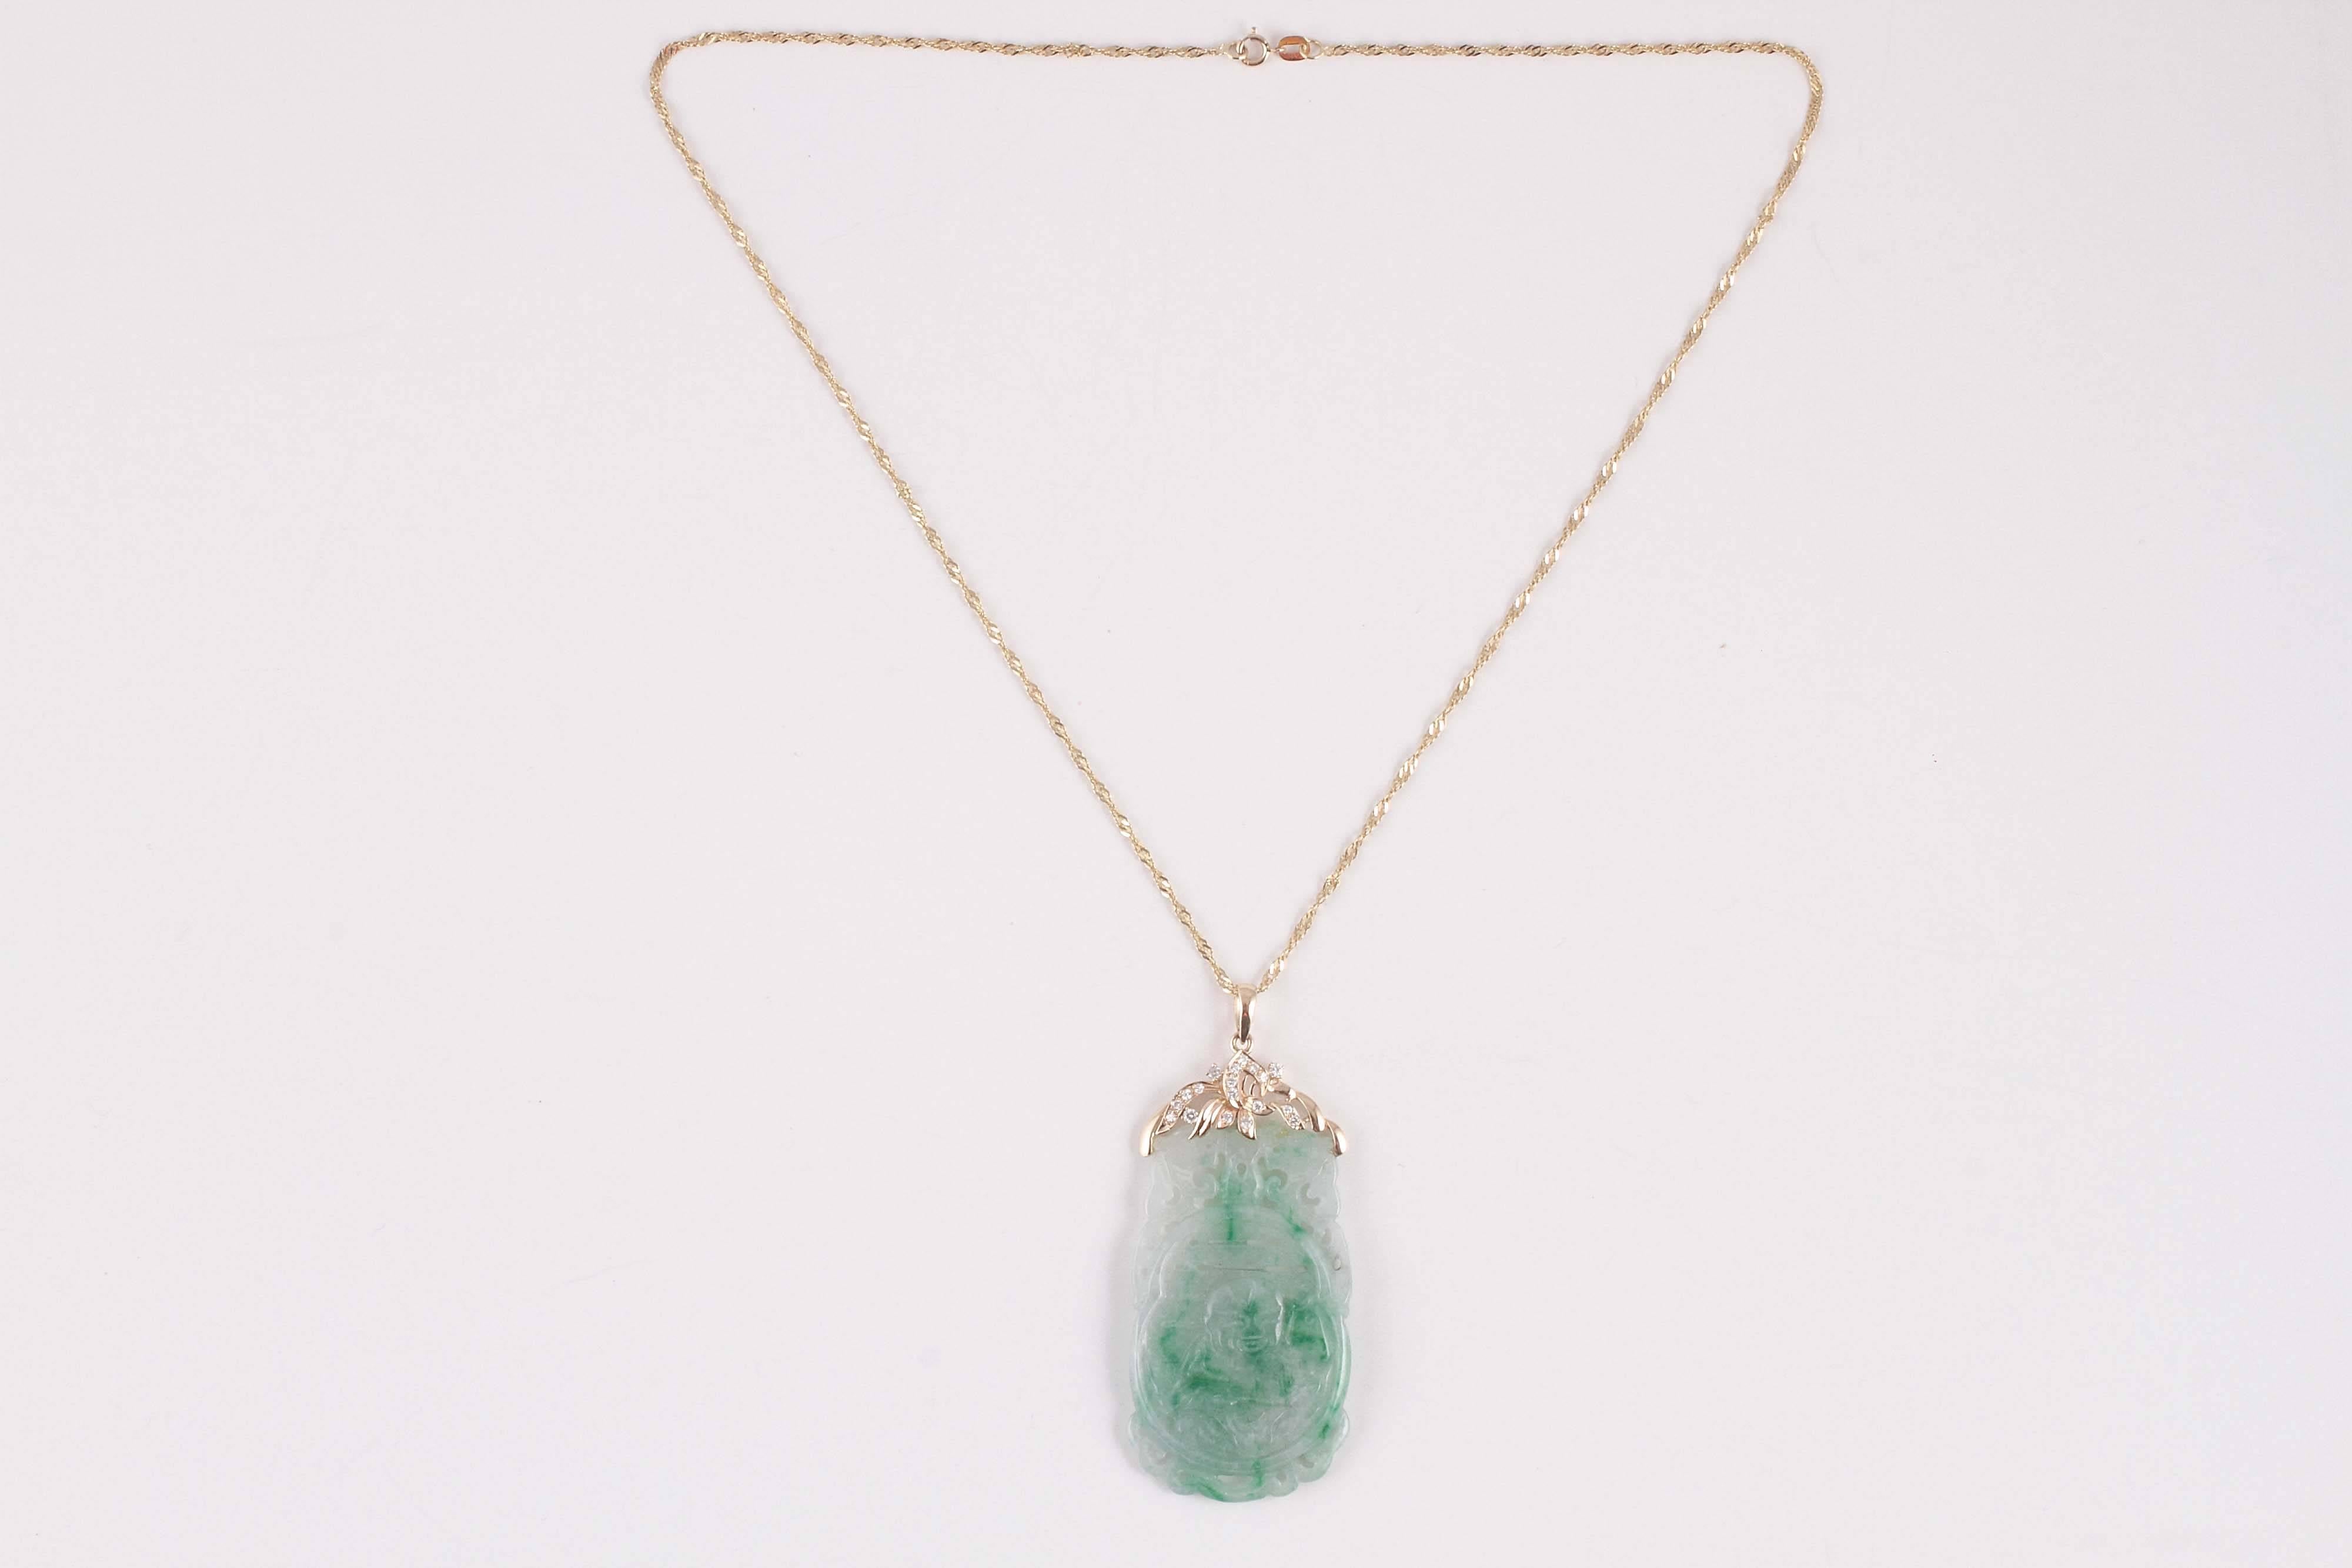 18 karat yellow gold, pendant measures 60.00 mm, chain 18 inches.  Light green mixed into the beautiful jade is sometimes called 